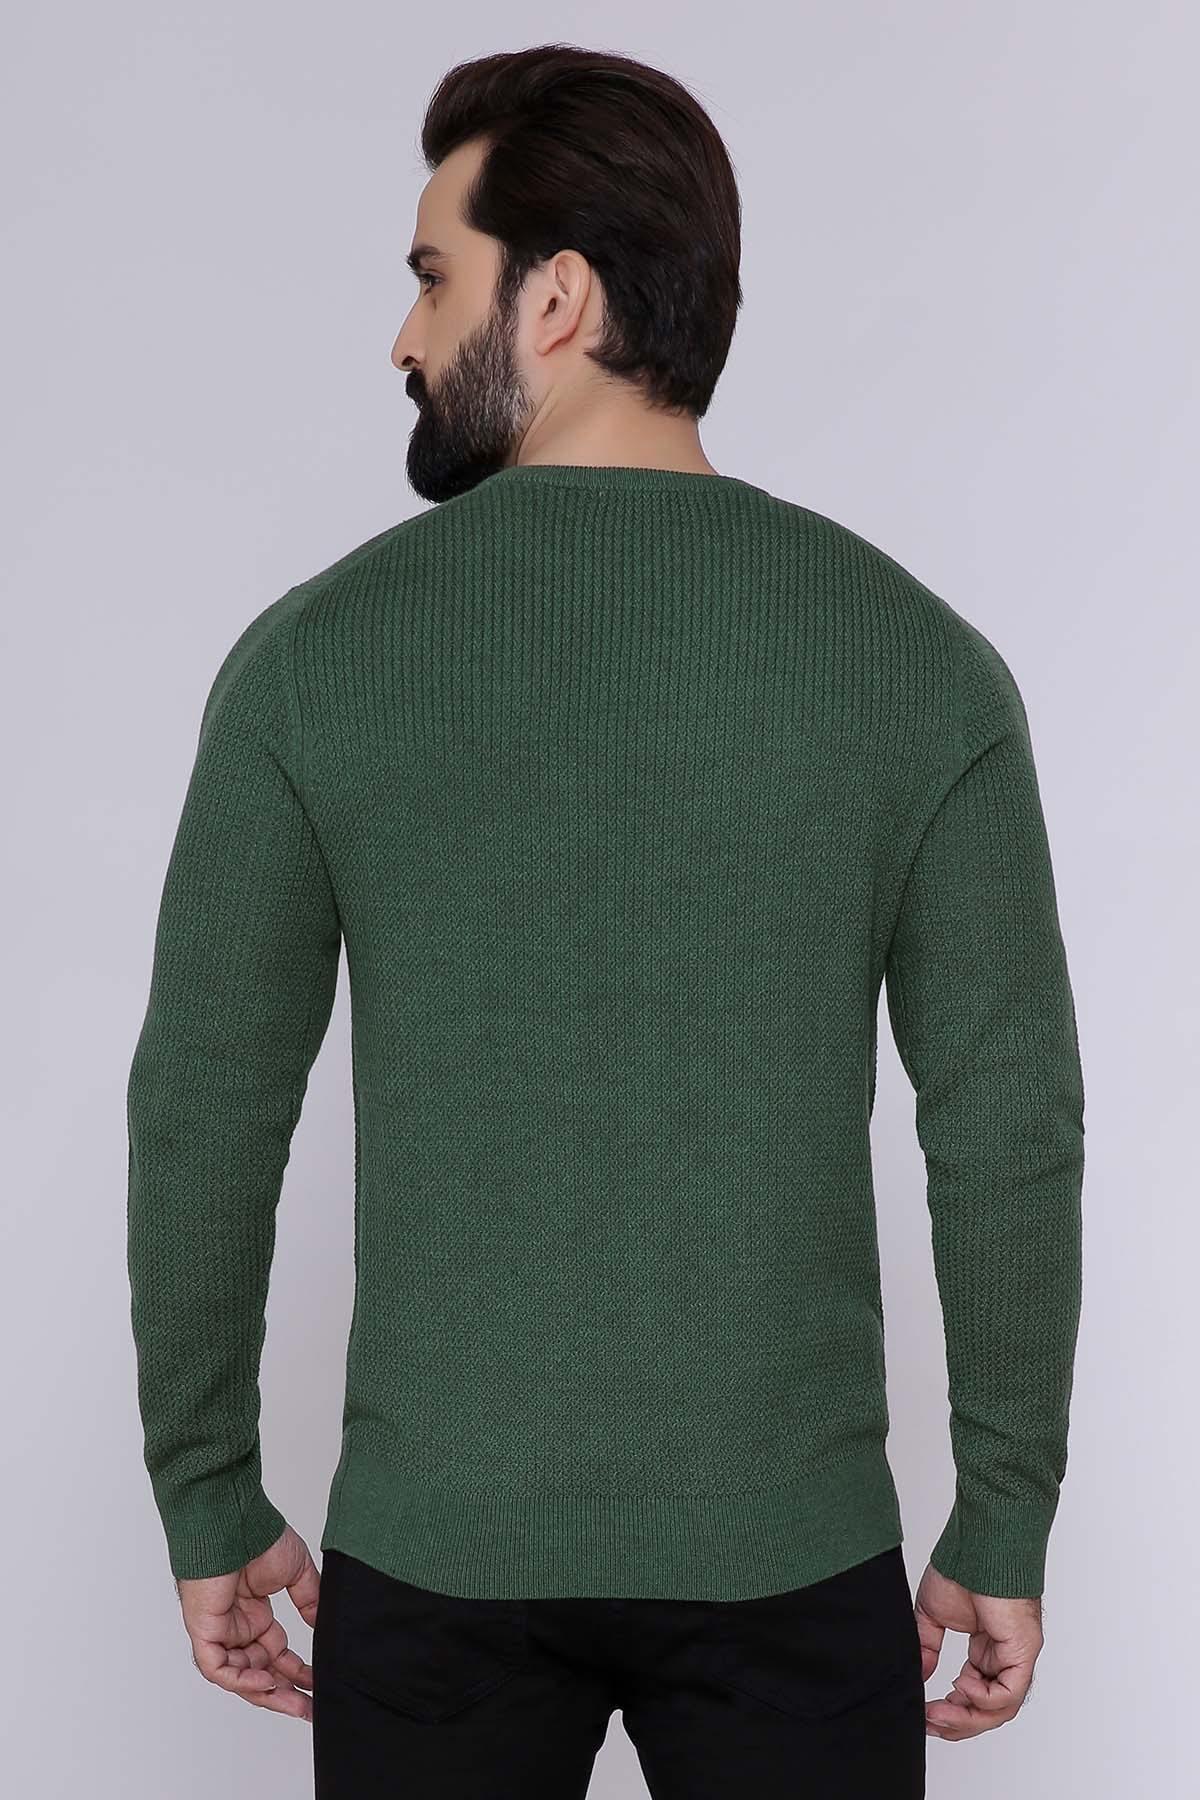 SWEATER ROUND NECK FULL SLEEVE GREEN at Charcoal Clothing